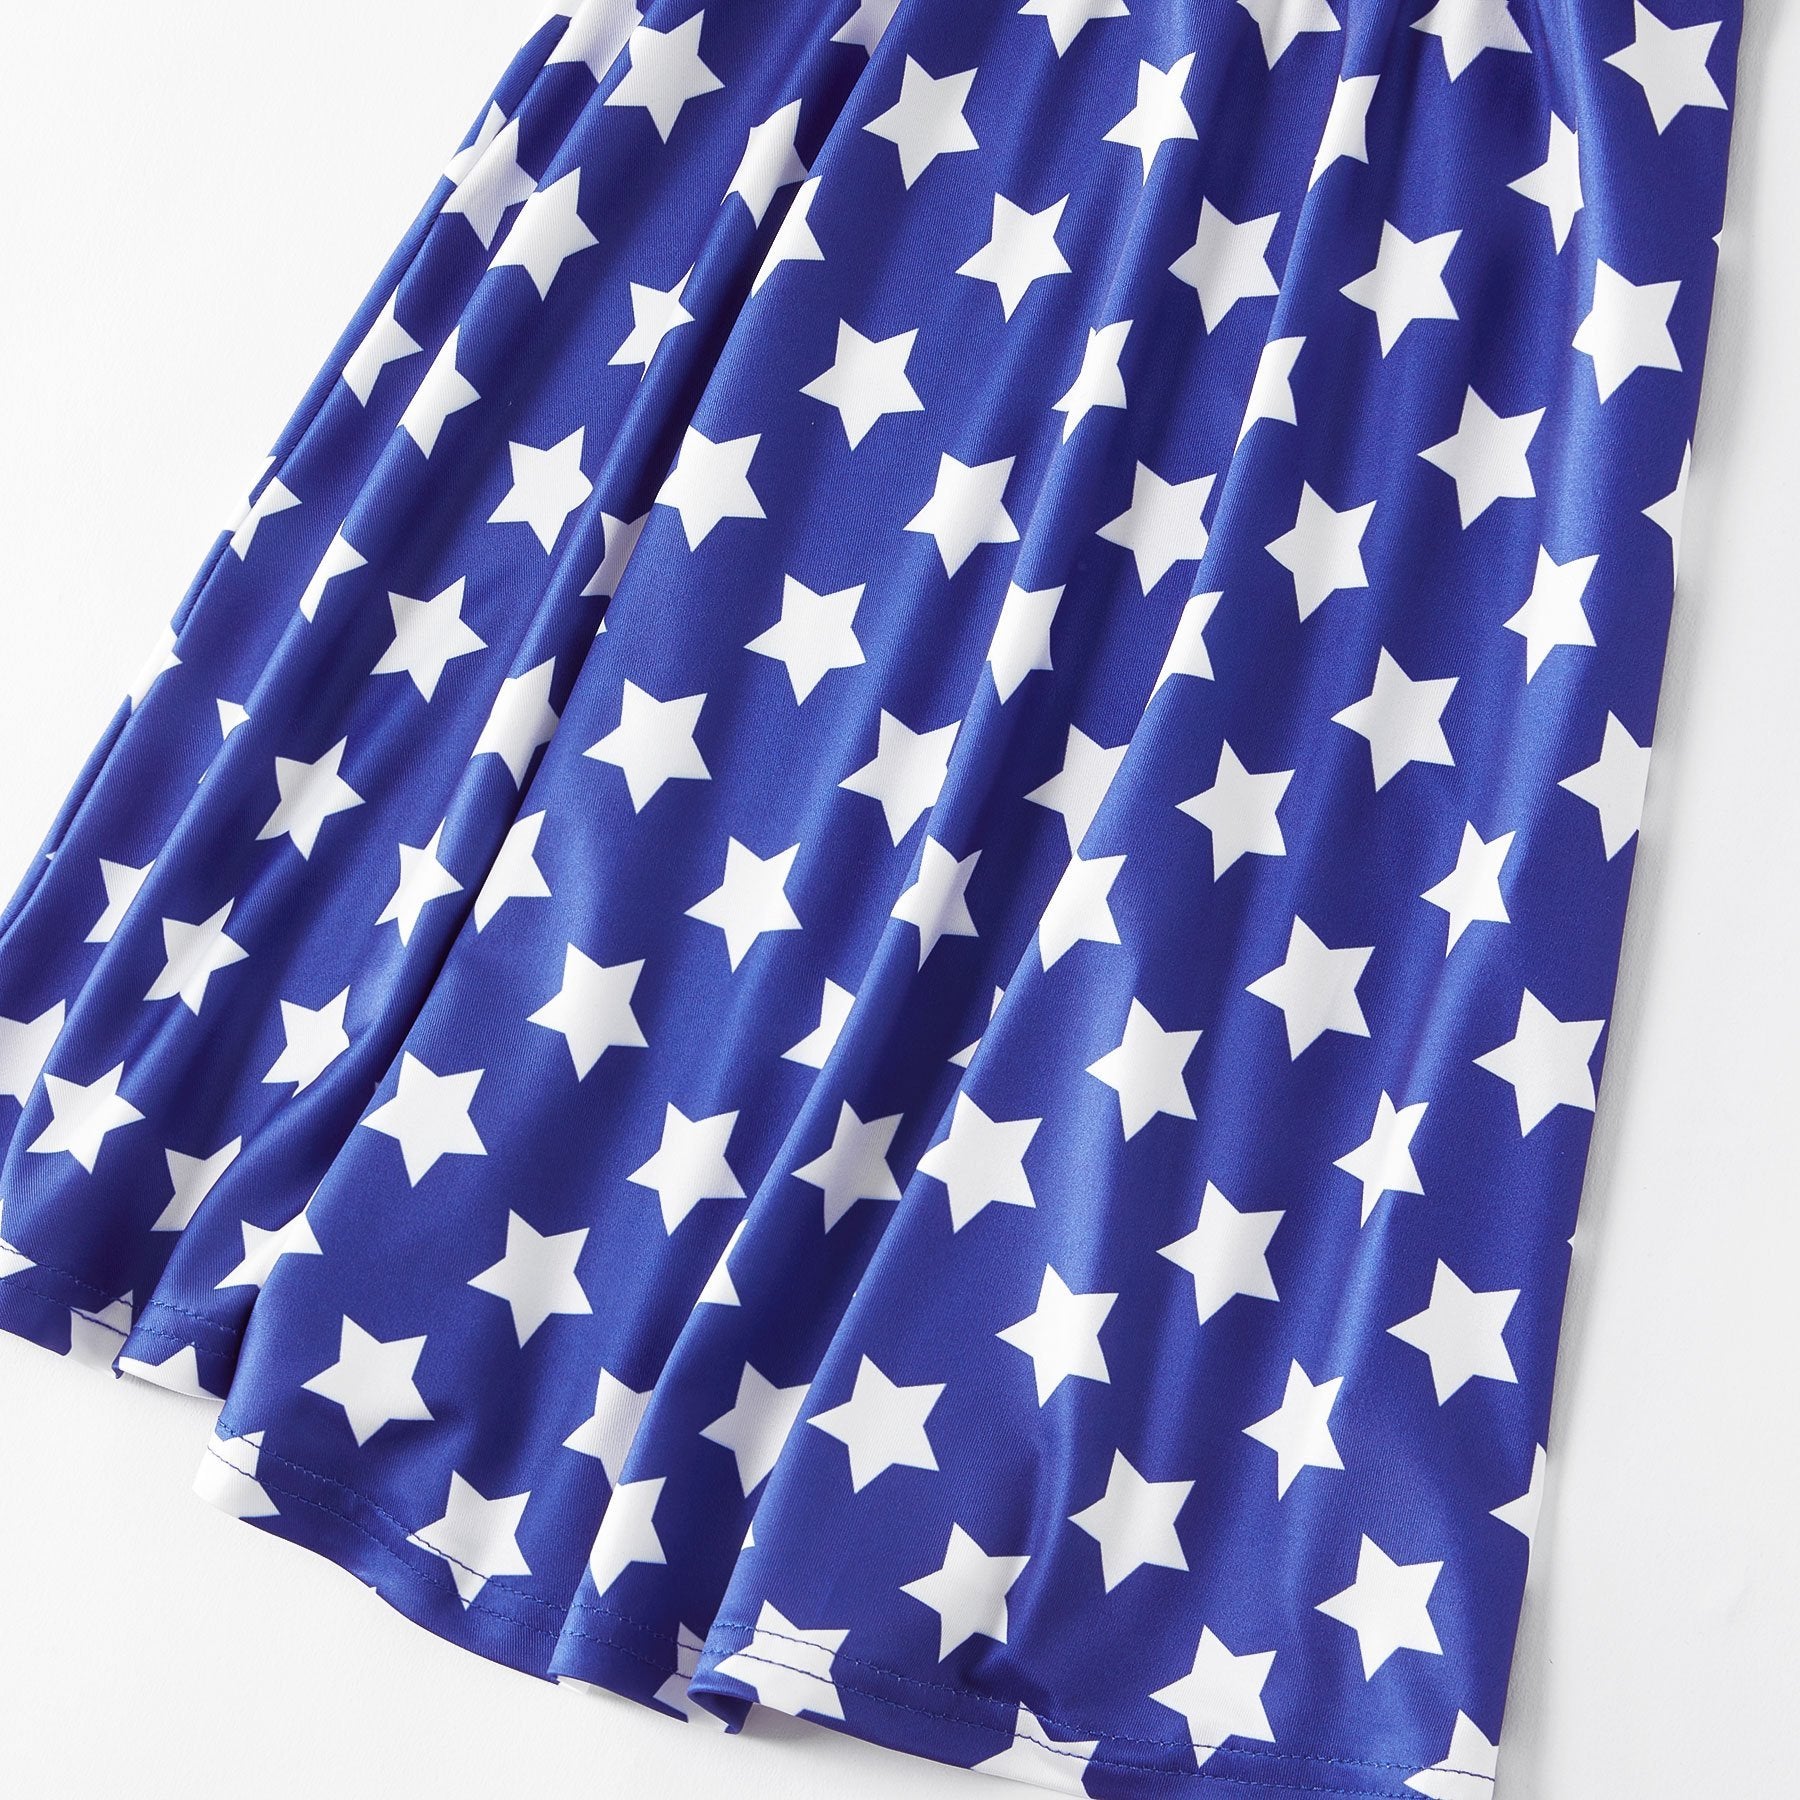 Stars Stitching Stripe Dresses for Mommy and Me (3553680916564)